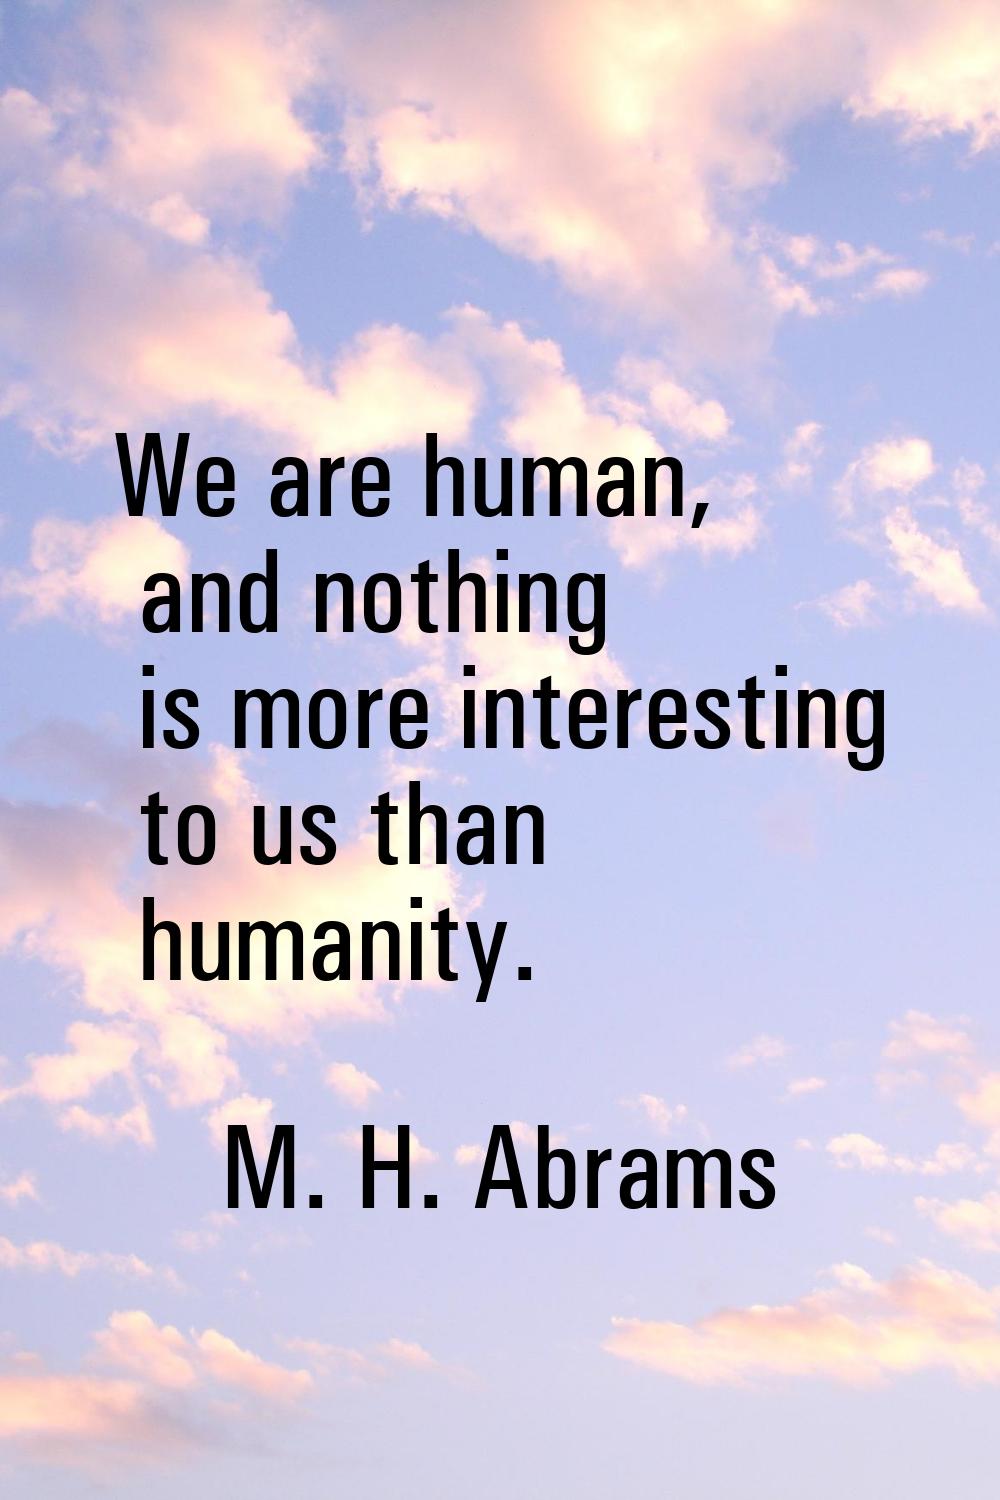 We are human, and nothing is more interesting to us than humanity.